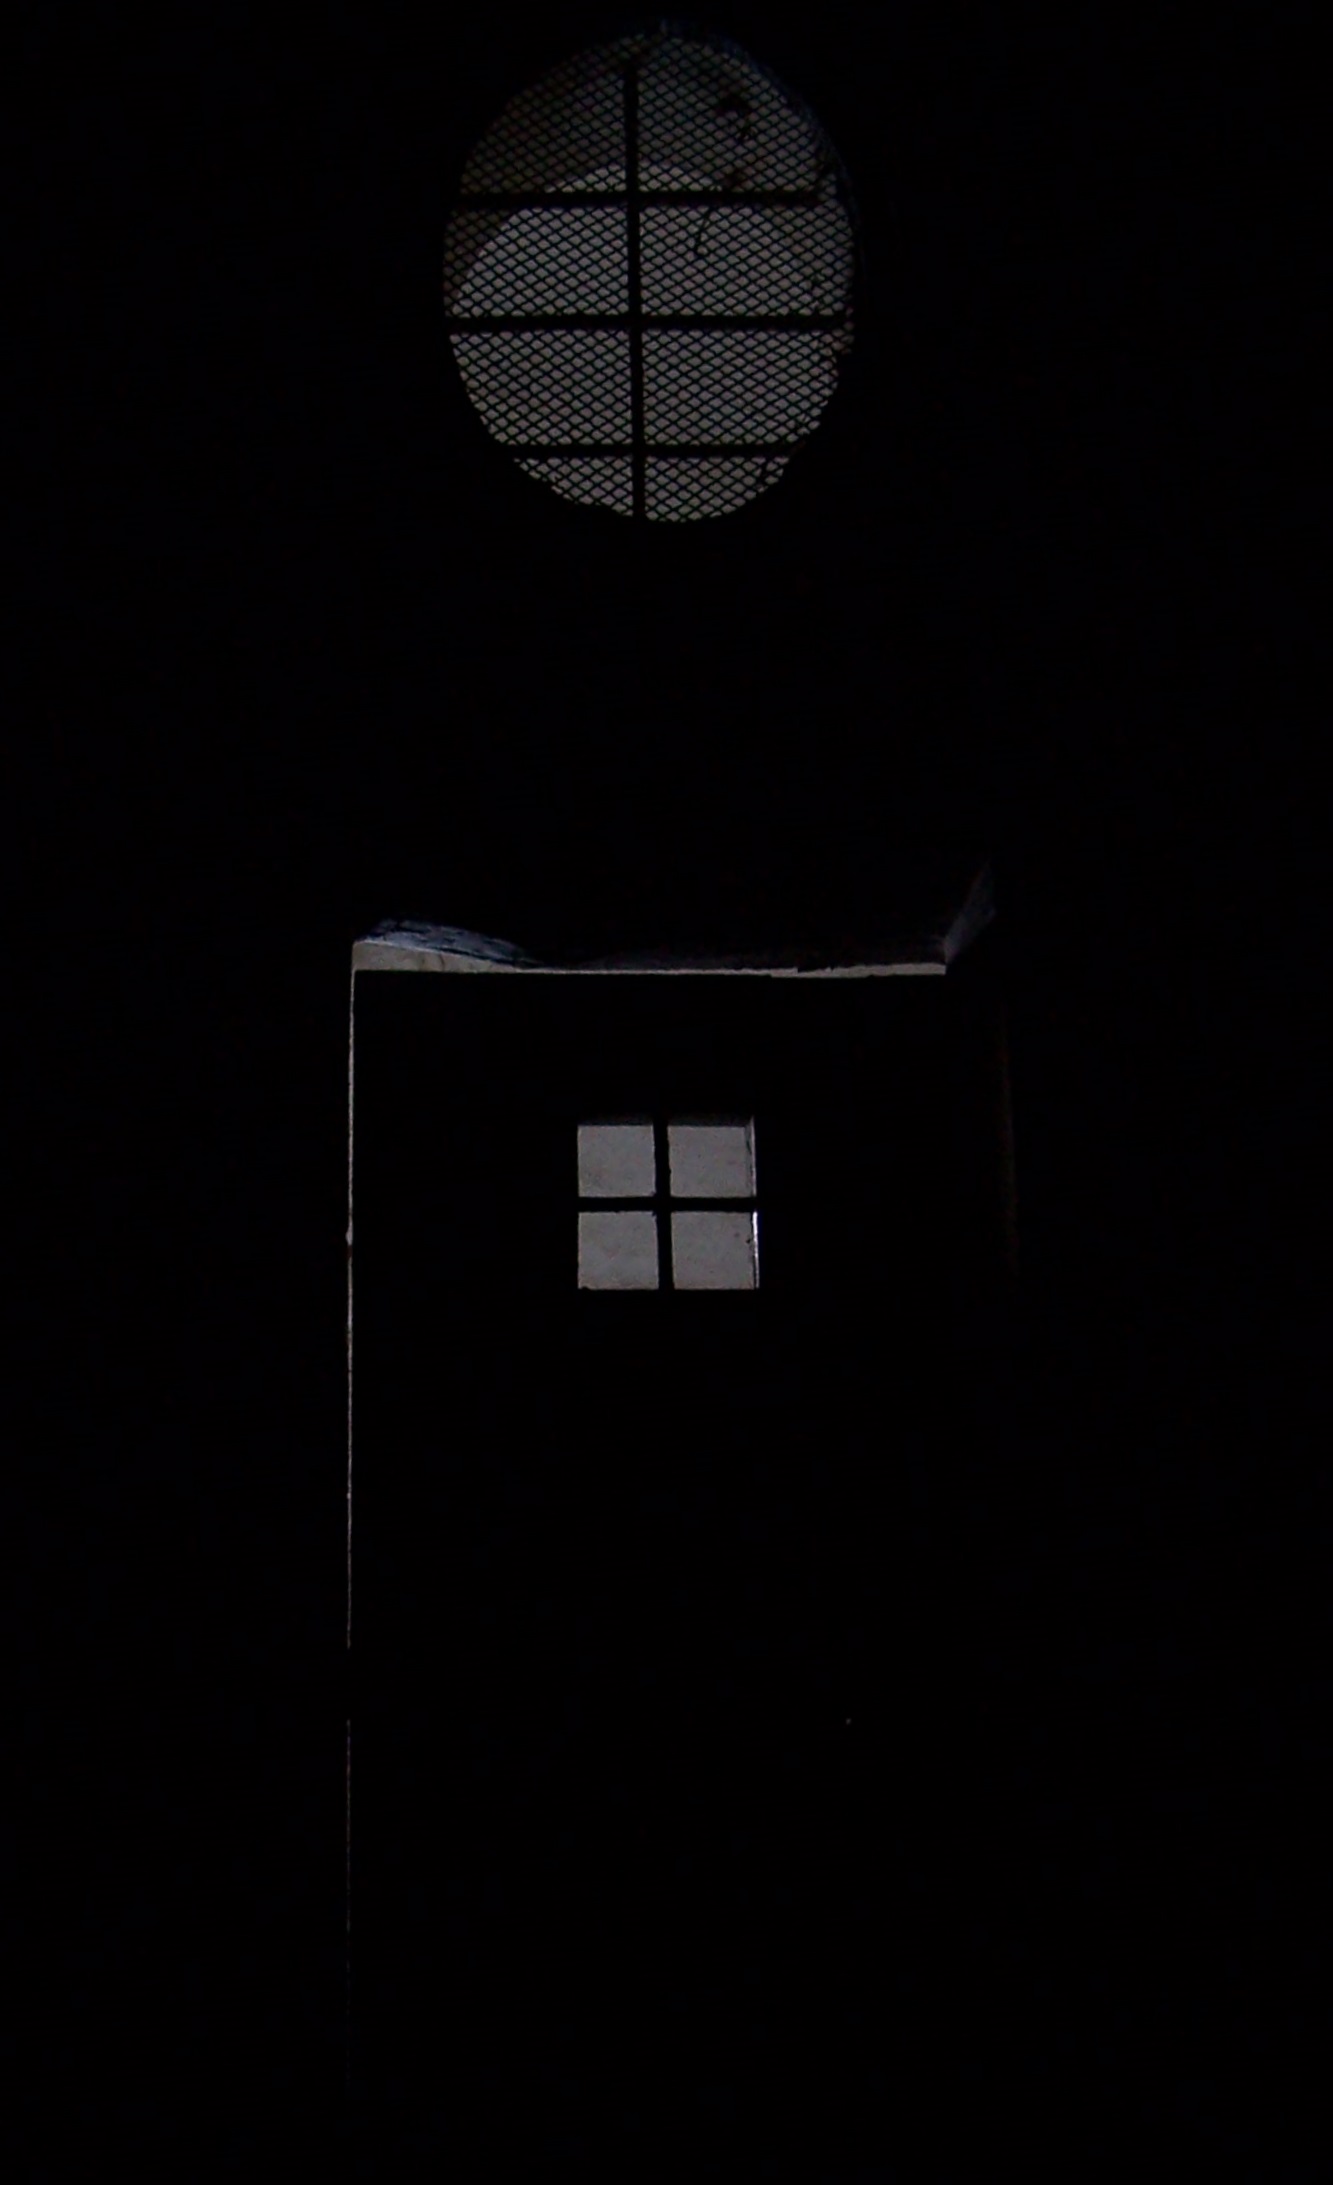 the back wall of a house, lit up by the darkness